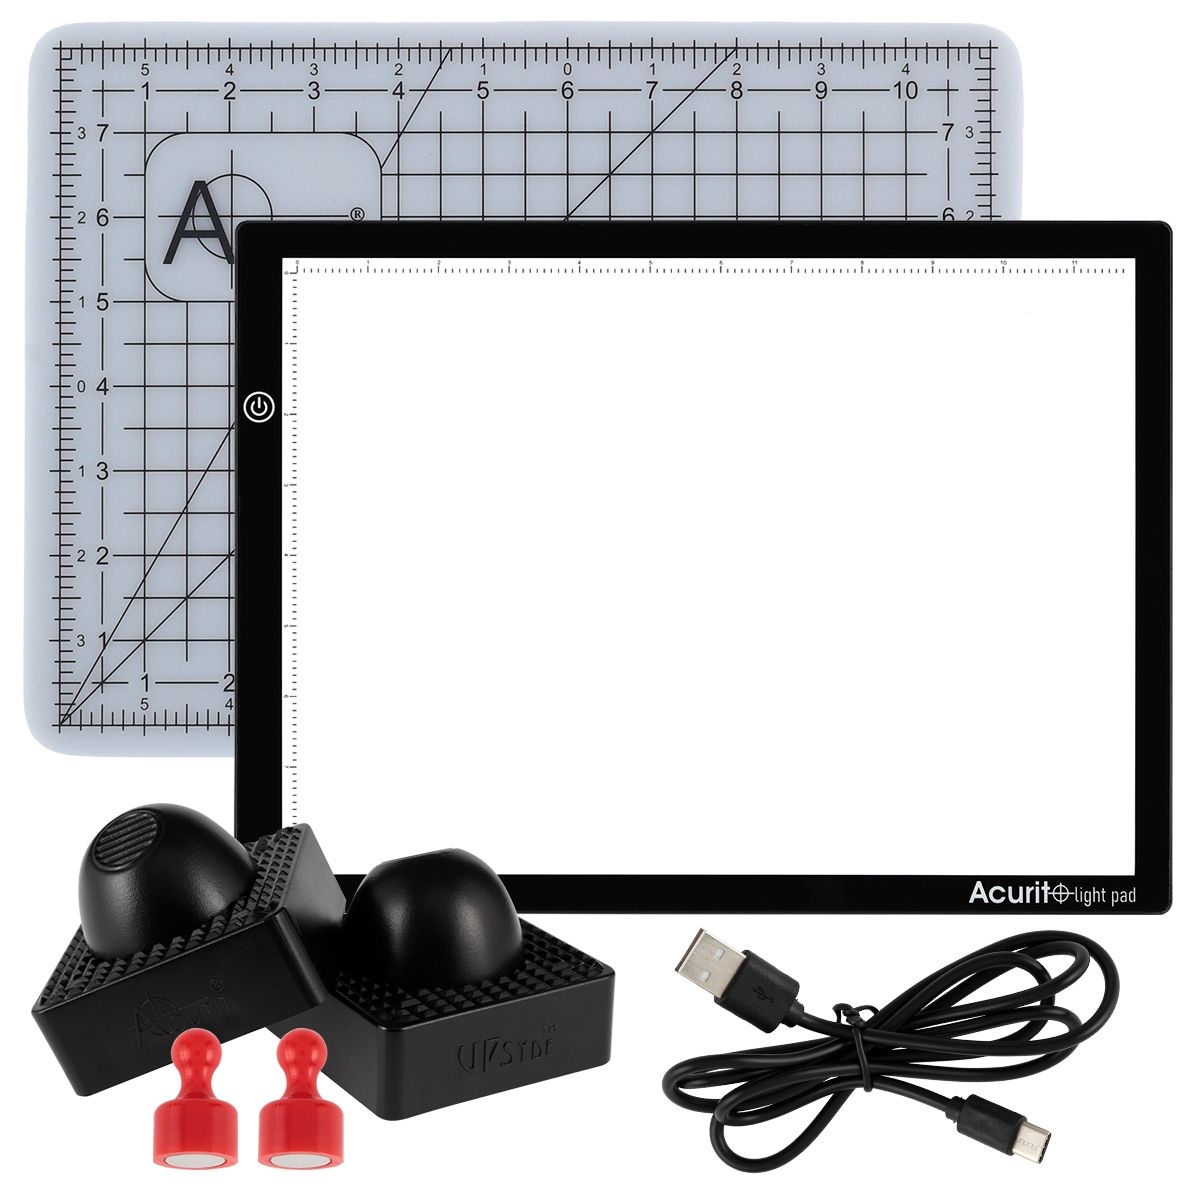 Acurit LED Magnetic Light Pad